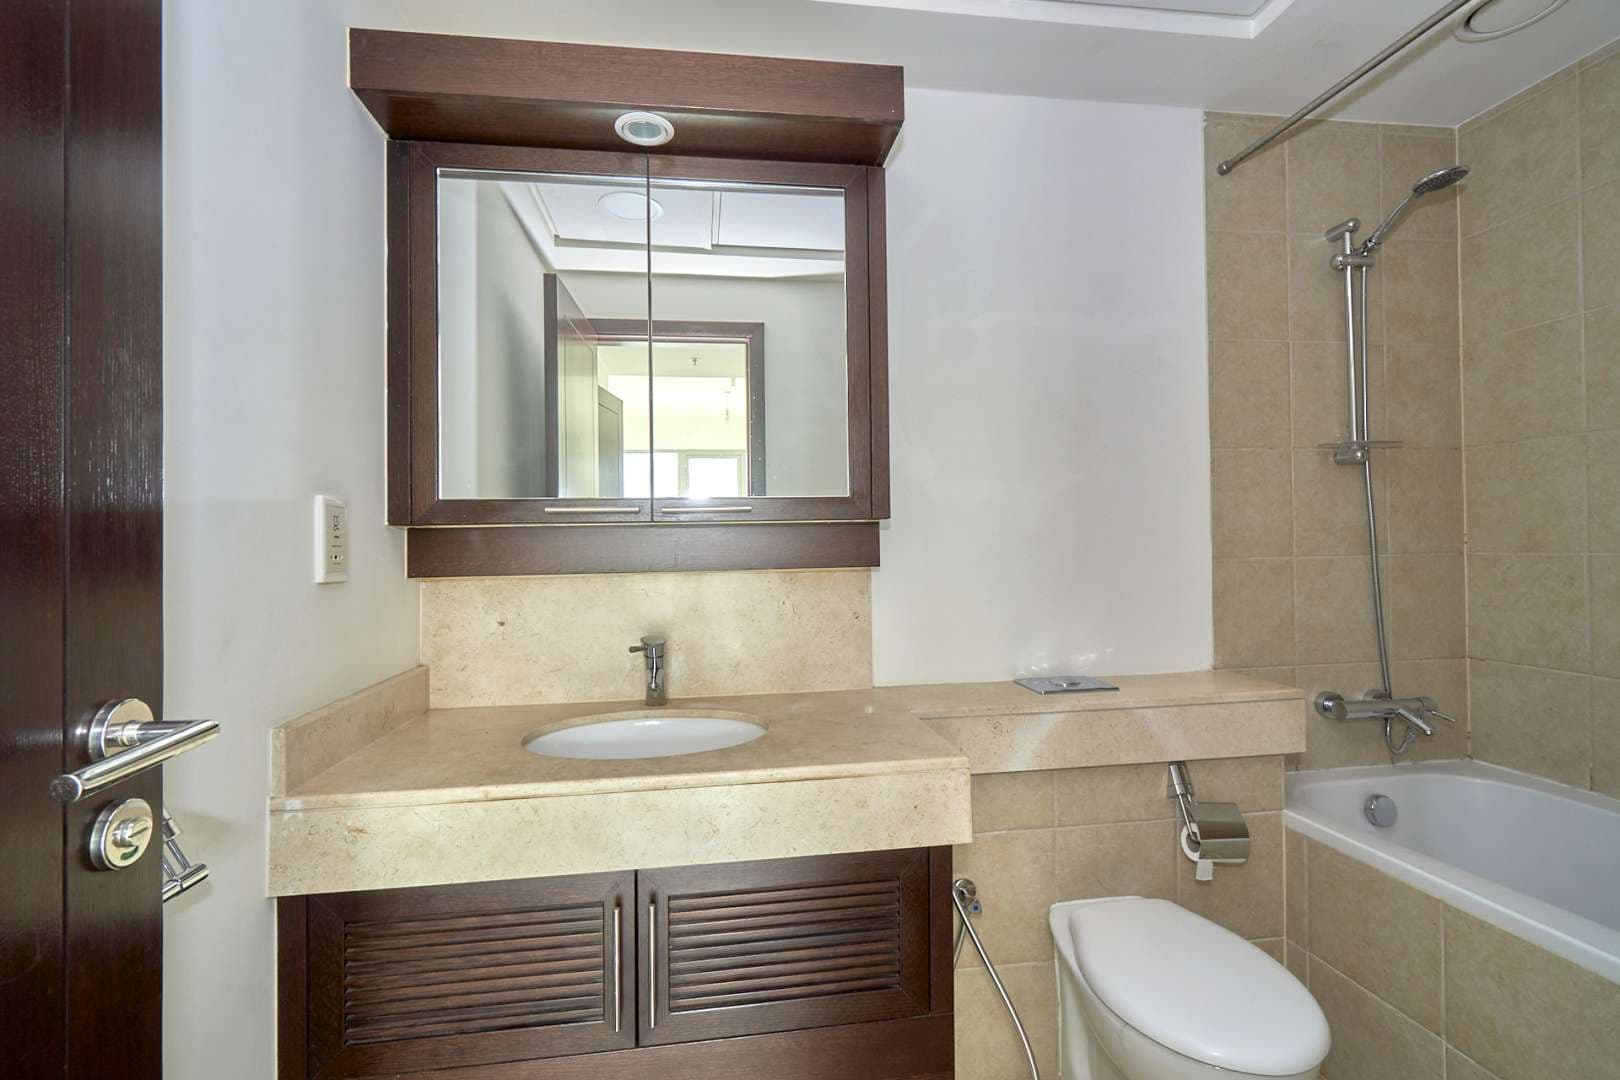 1 Bedroom Apartment For Rent The Residences Lp09118 29ca364db37a9600.jpg